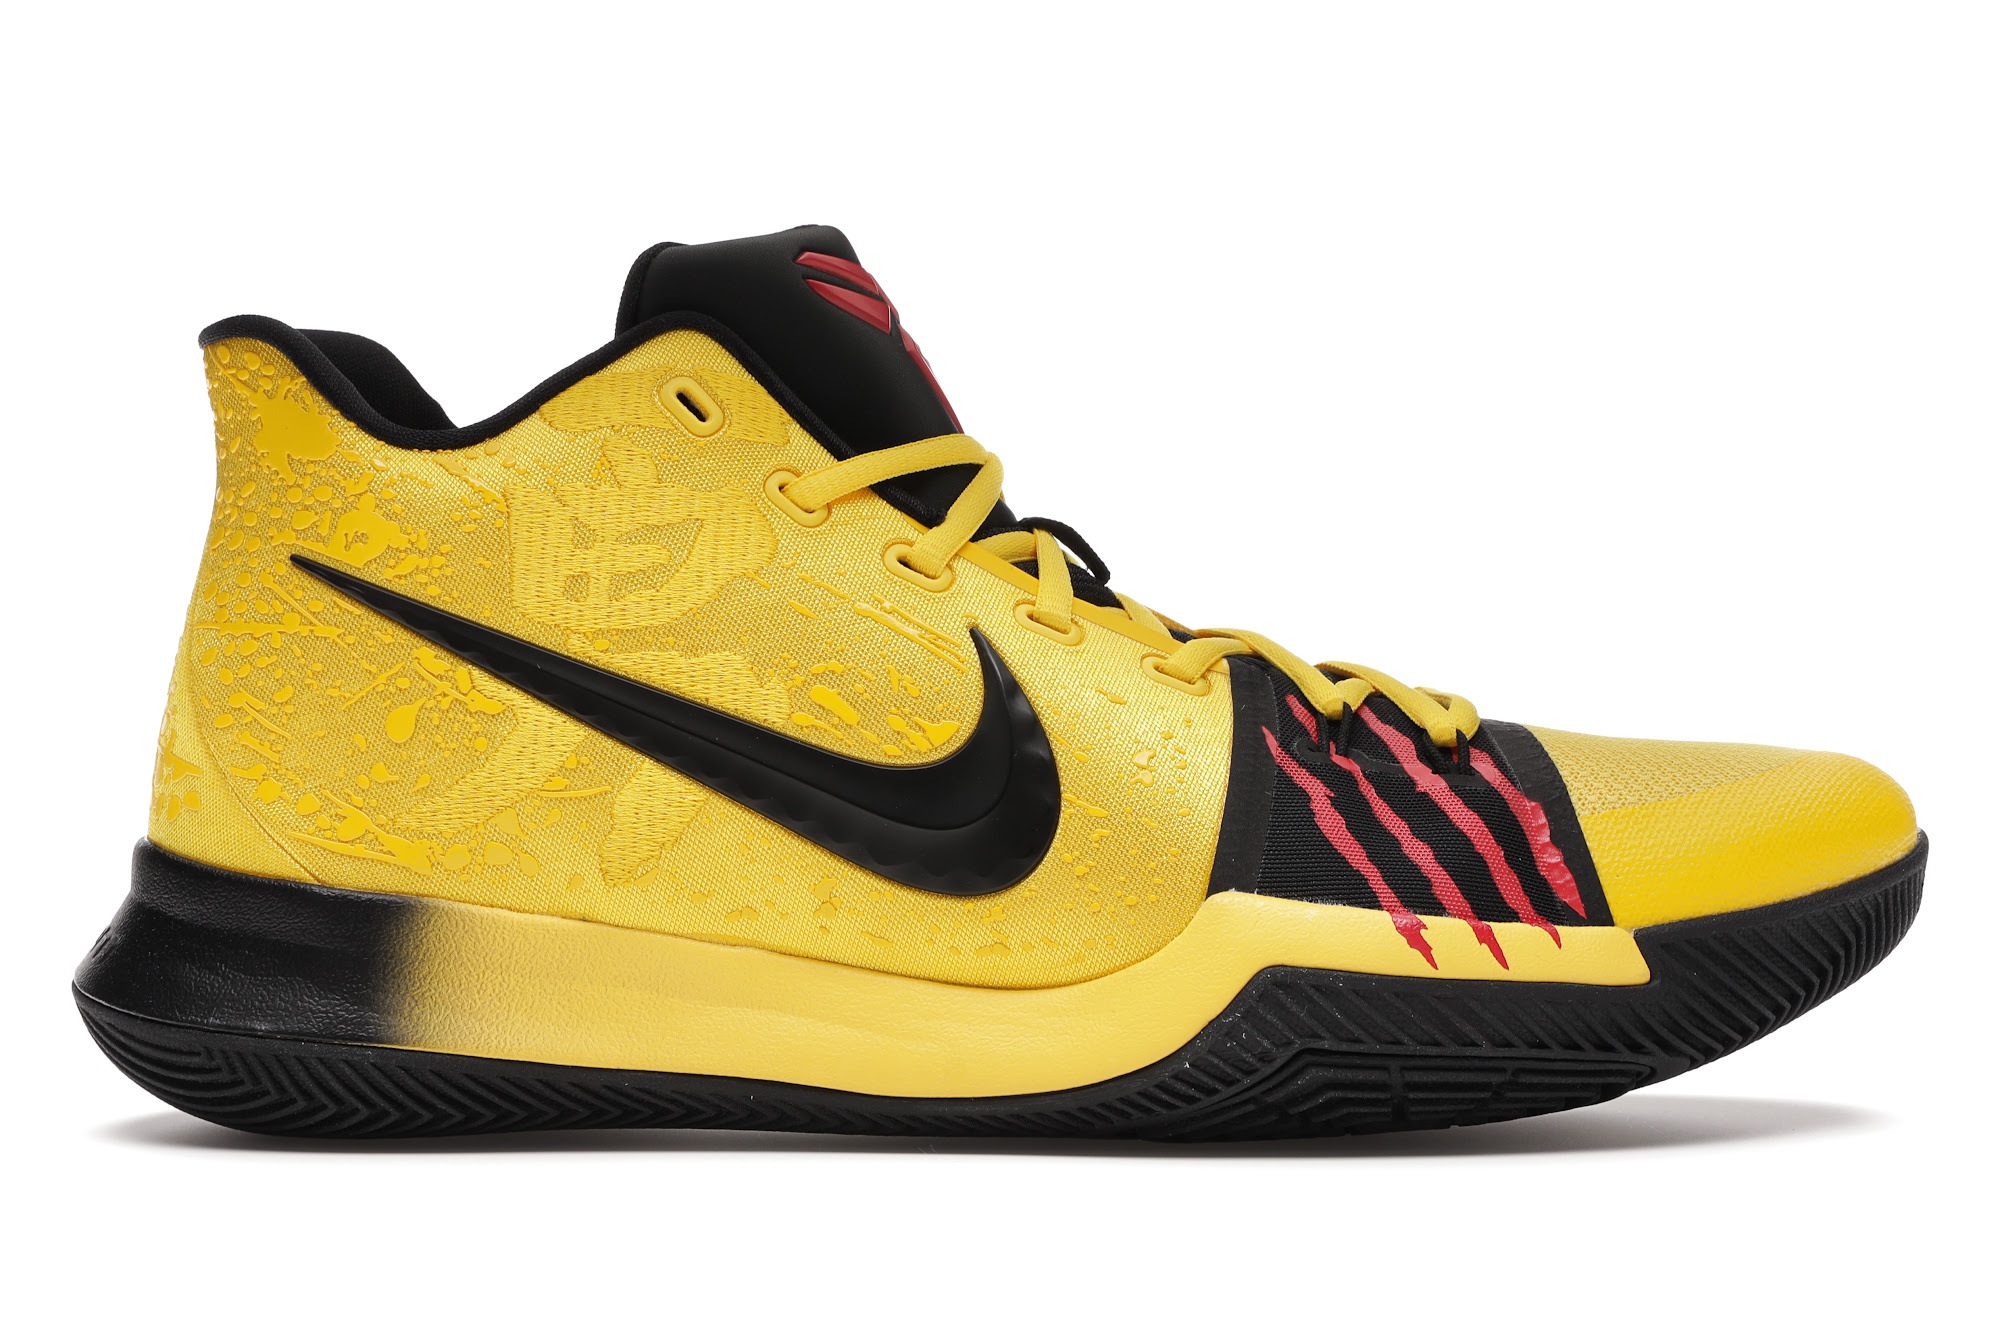 kyrie irving shoes bruce lee